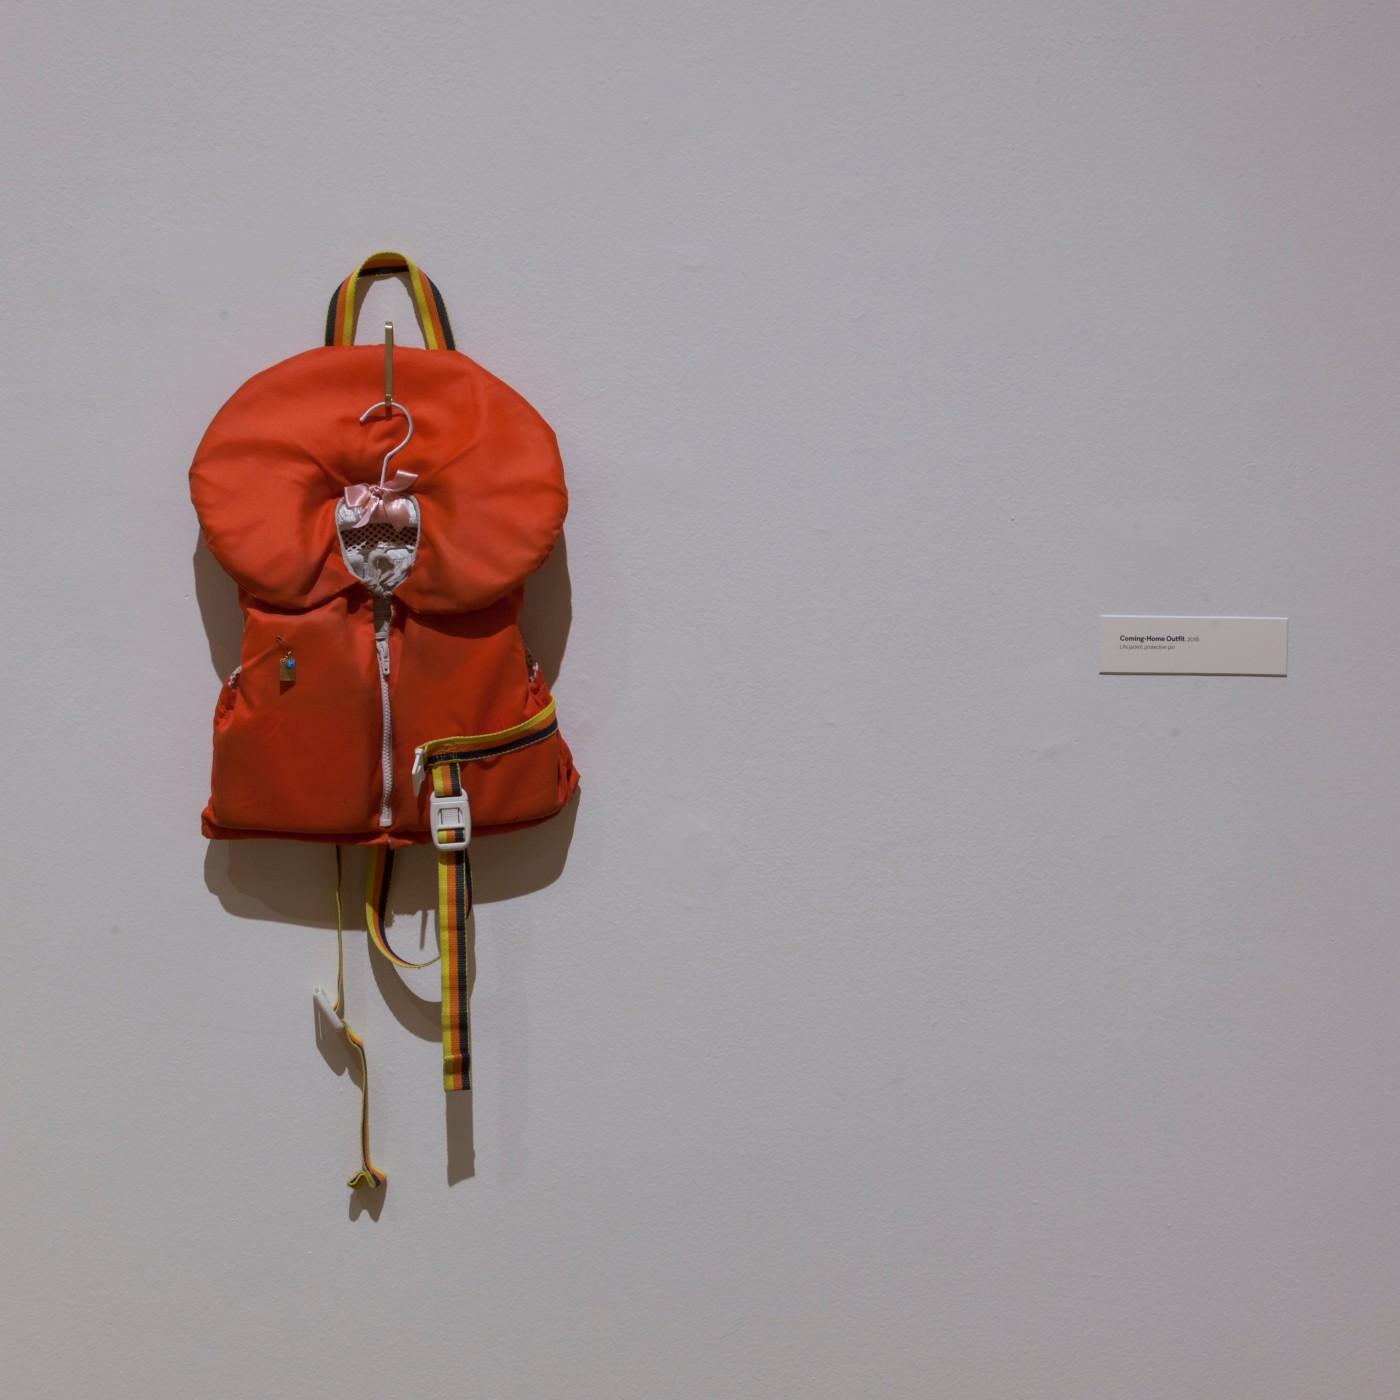 Installation view of Essma Imady: Thicker Than Water